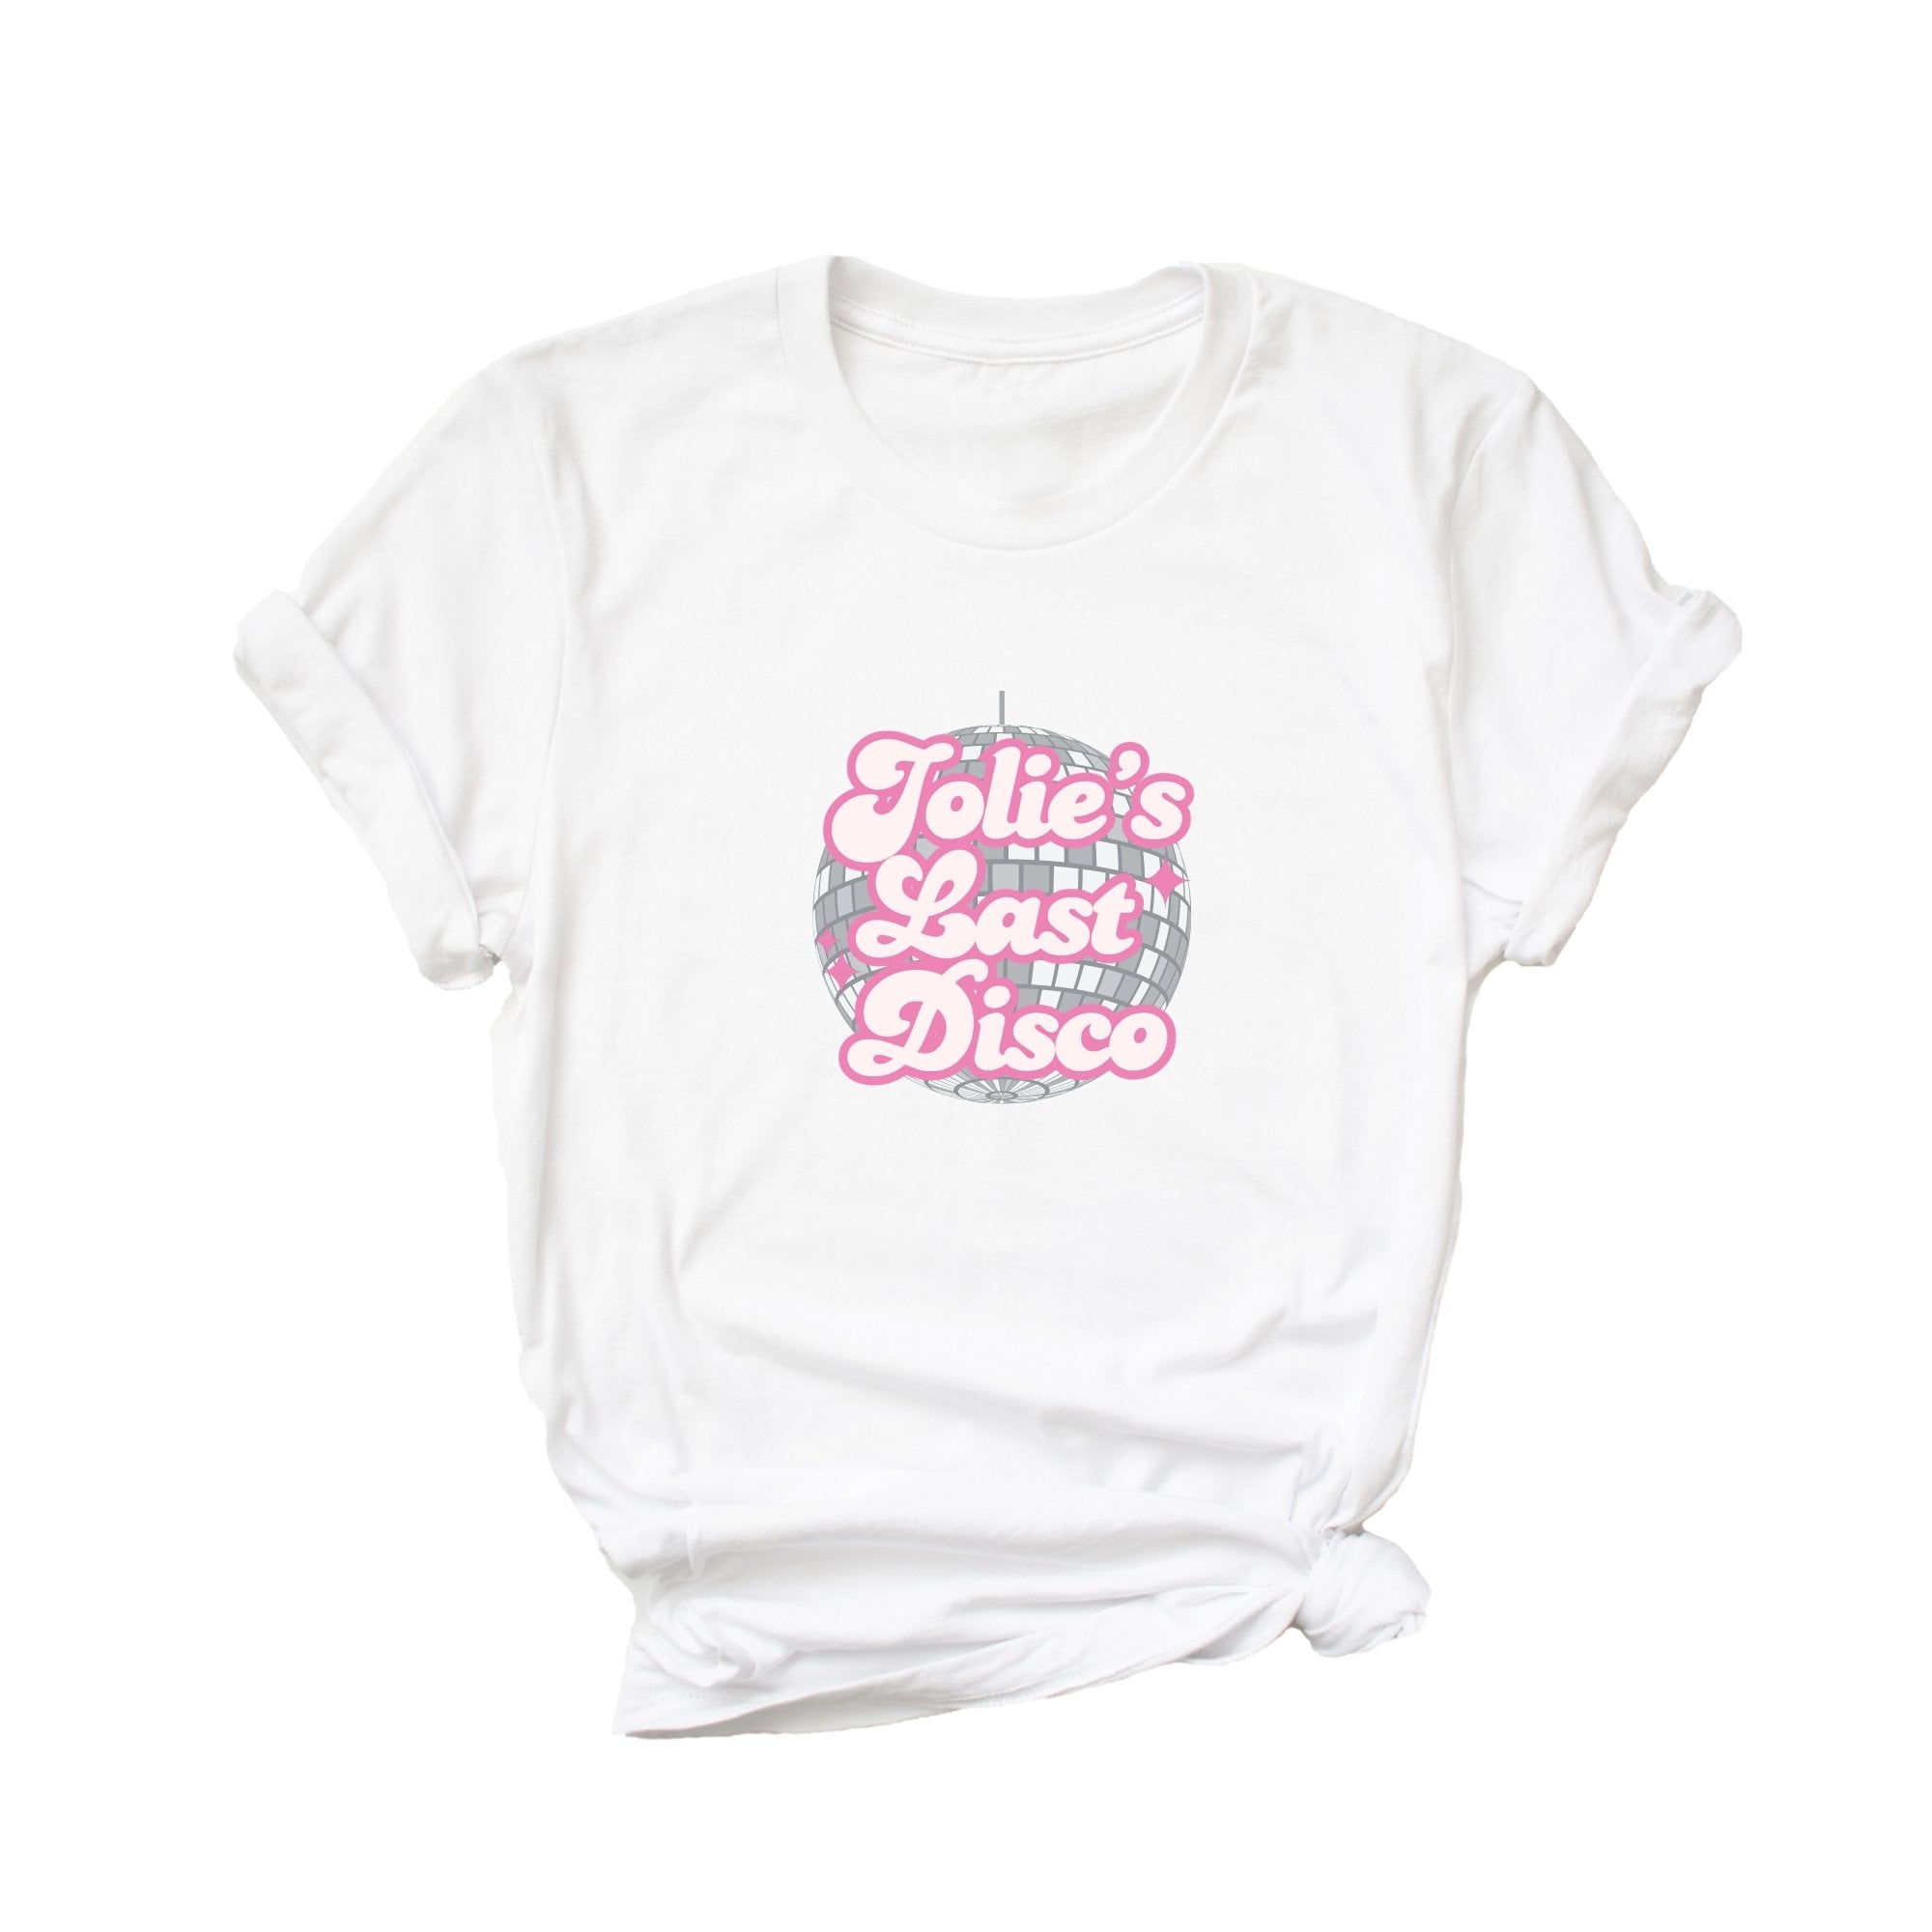 A white t shirt is customized with a disco ball design and "Jolie's Last Disco"